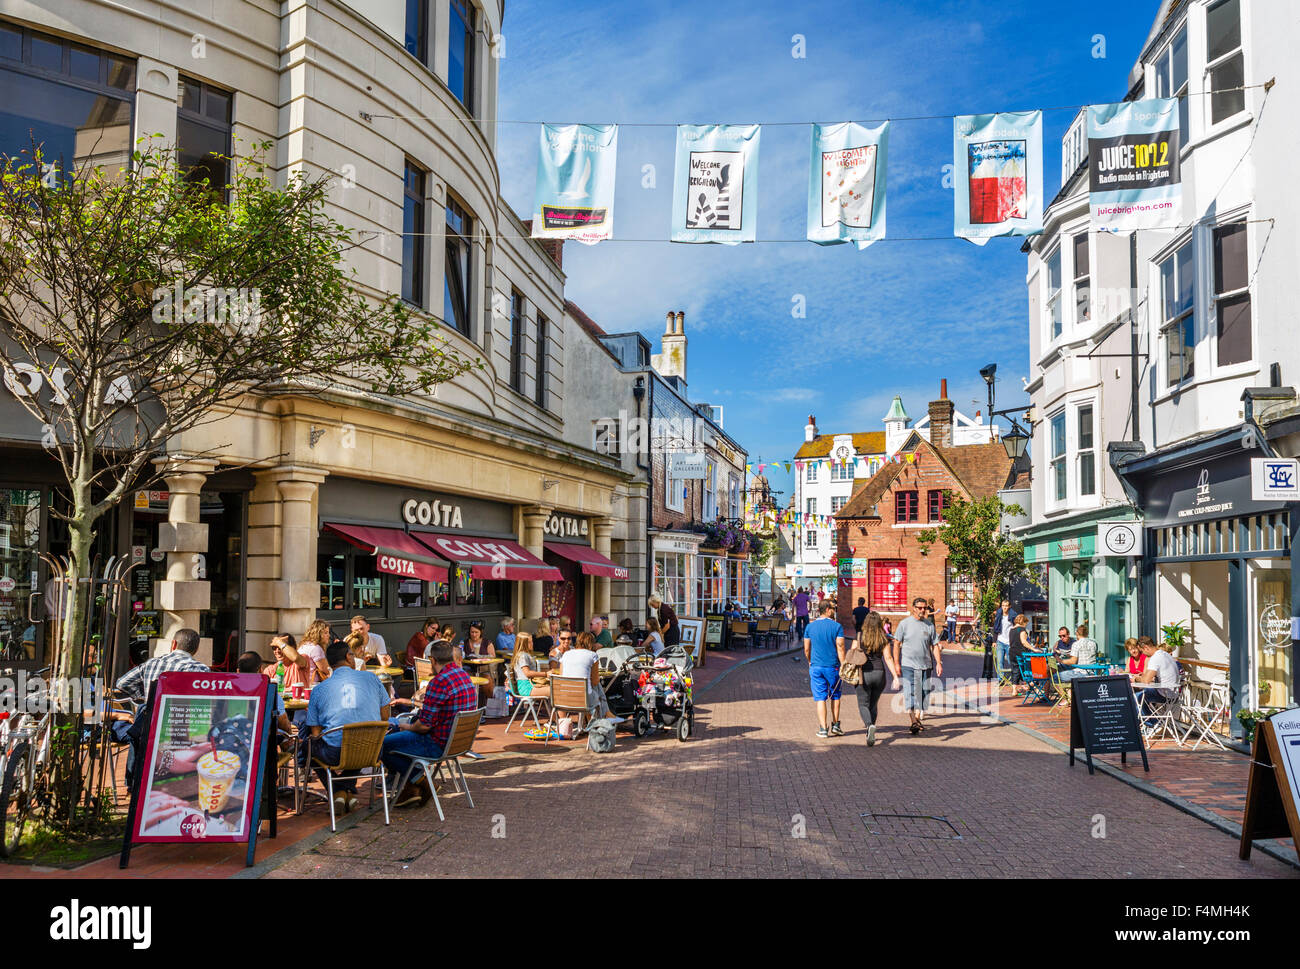 Cafes, bars, restaurants and shops on Market Street looking towards Dolphin Place,The Lanes, Brighton, East Sussex, England, UK Stock Photo